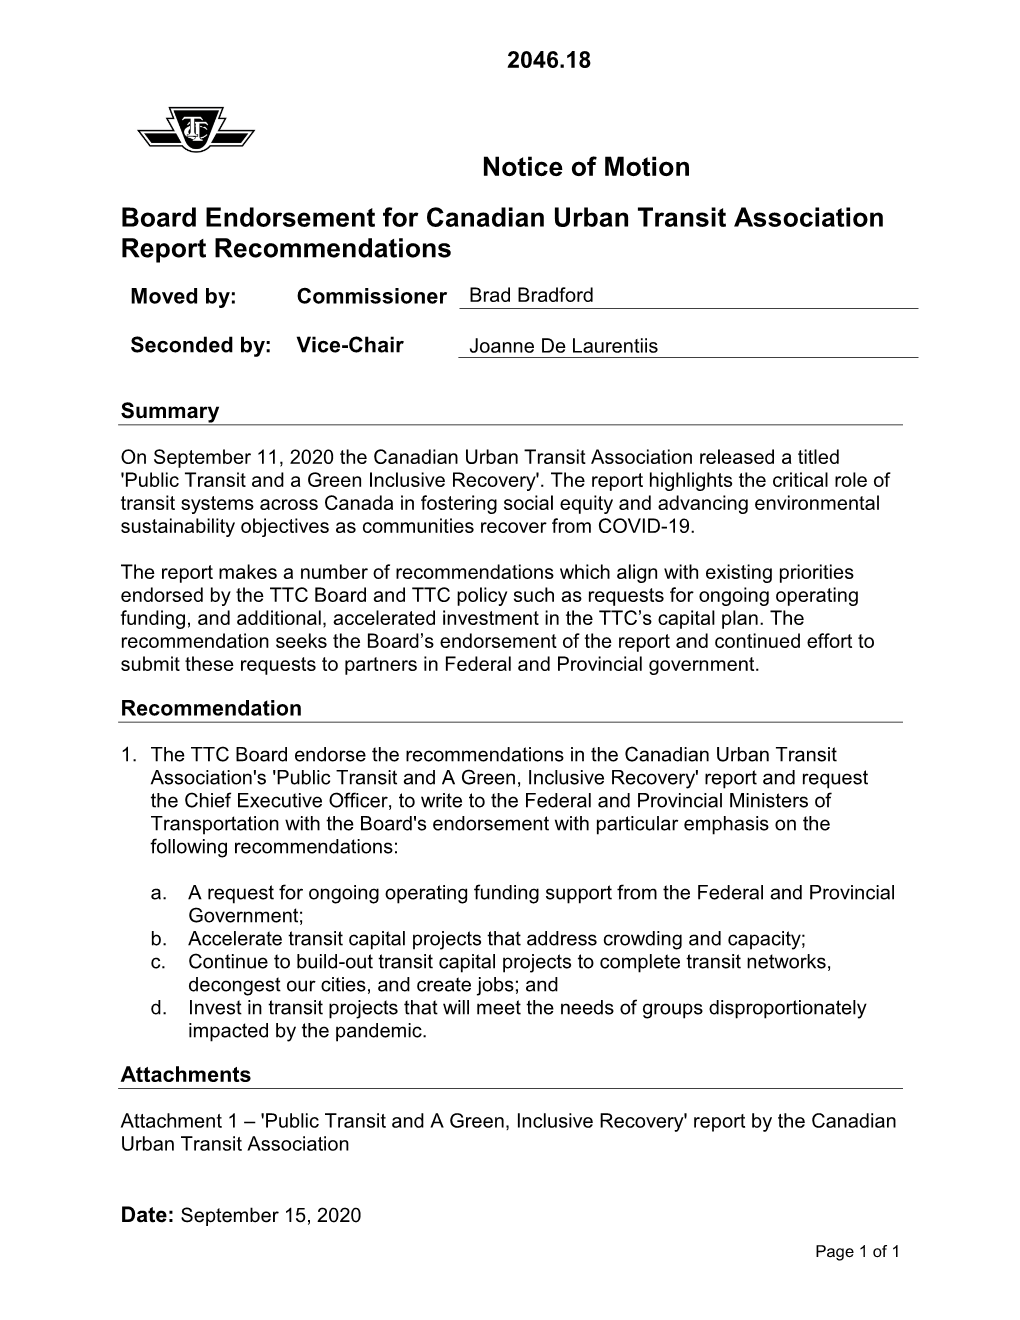 Notice of Motion Board Endorsement for Canadian Urban Transit Association Report Recommendations